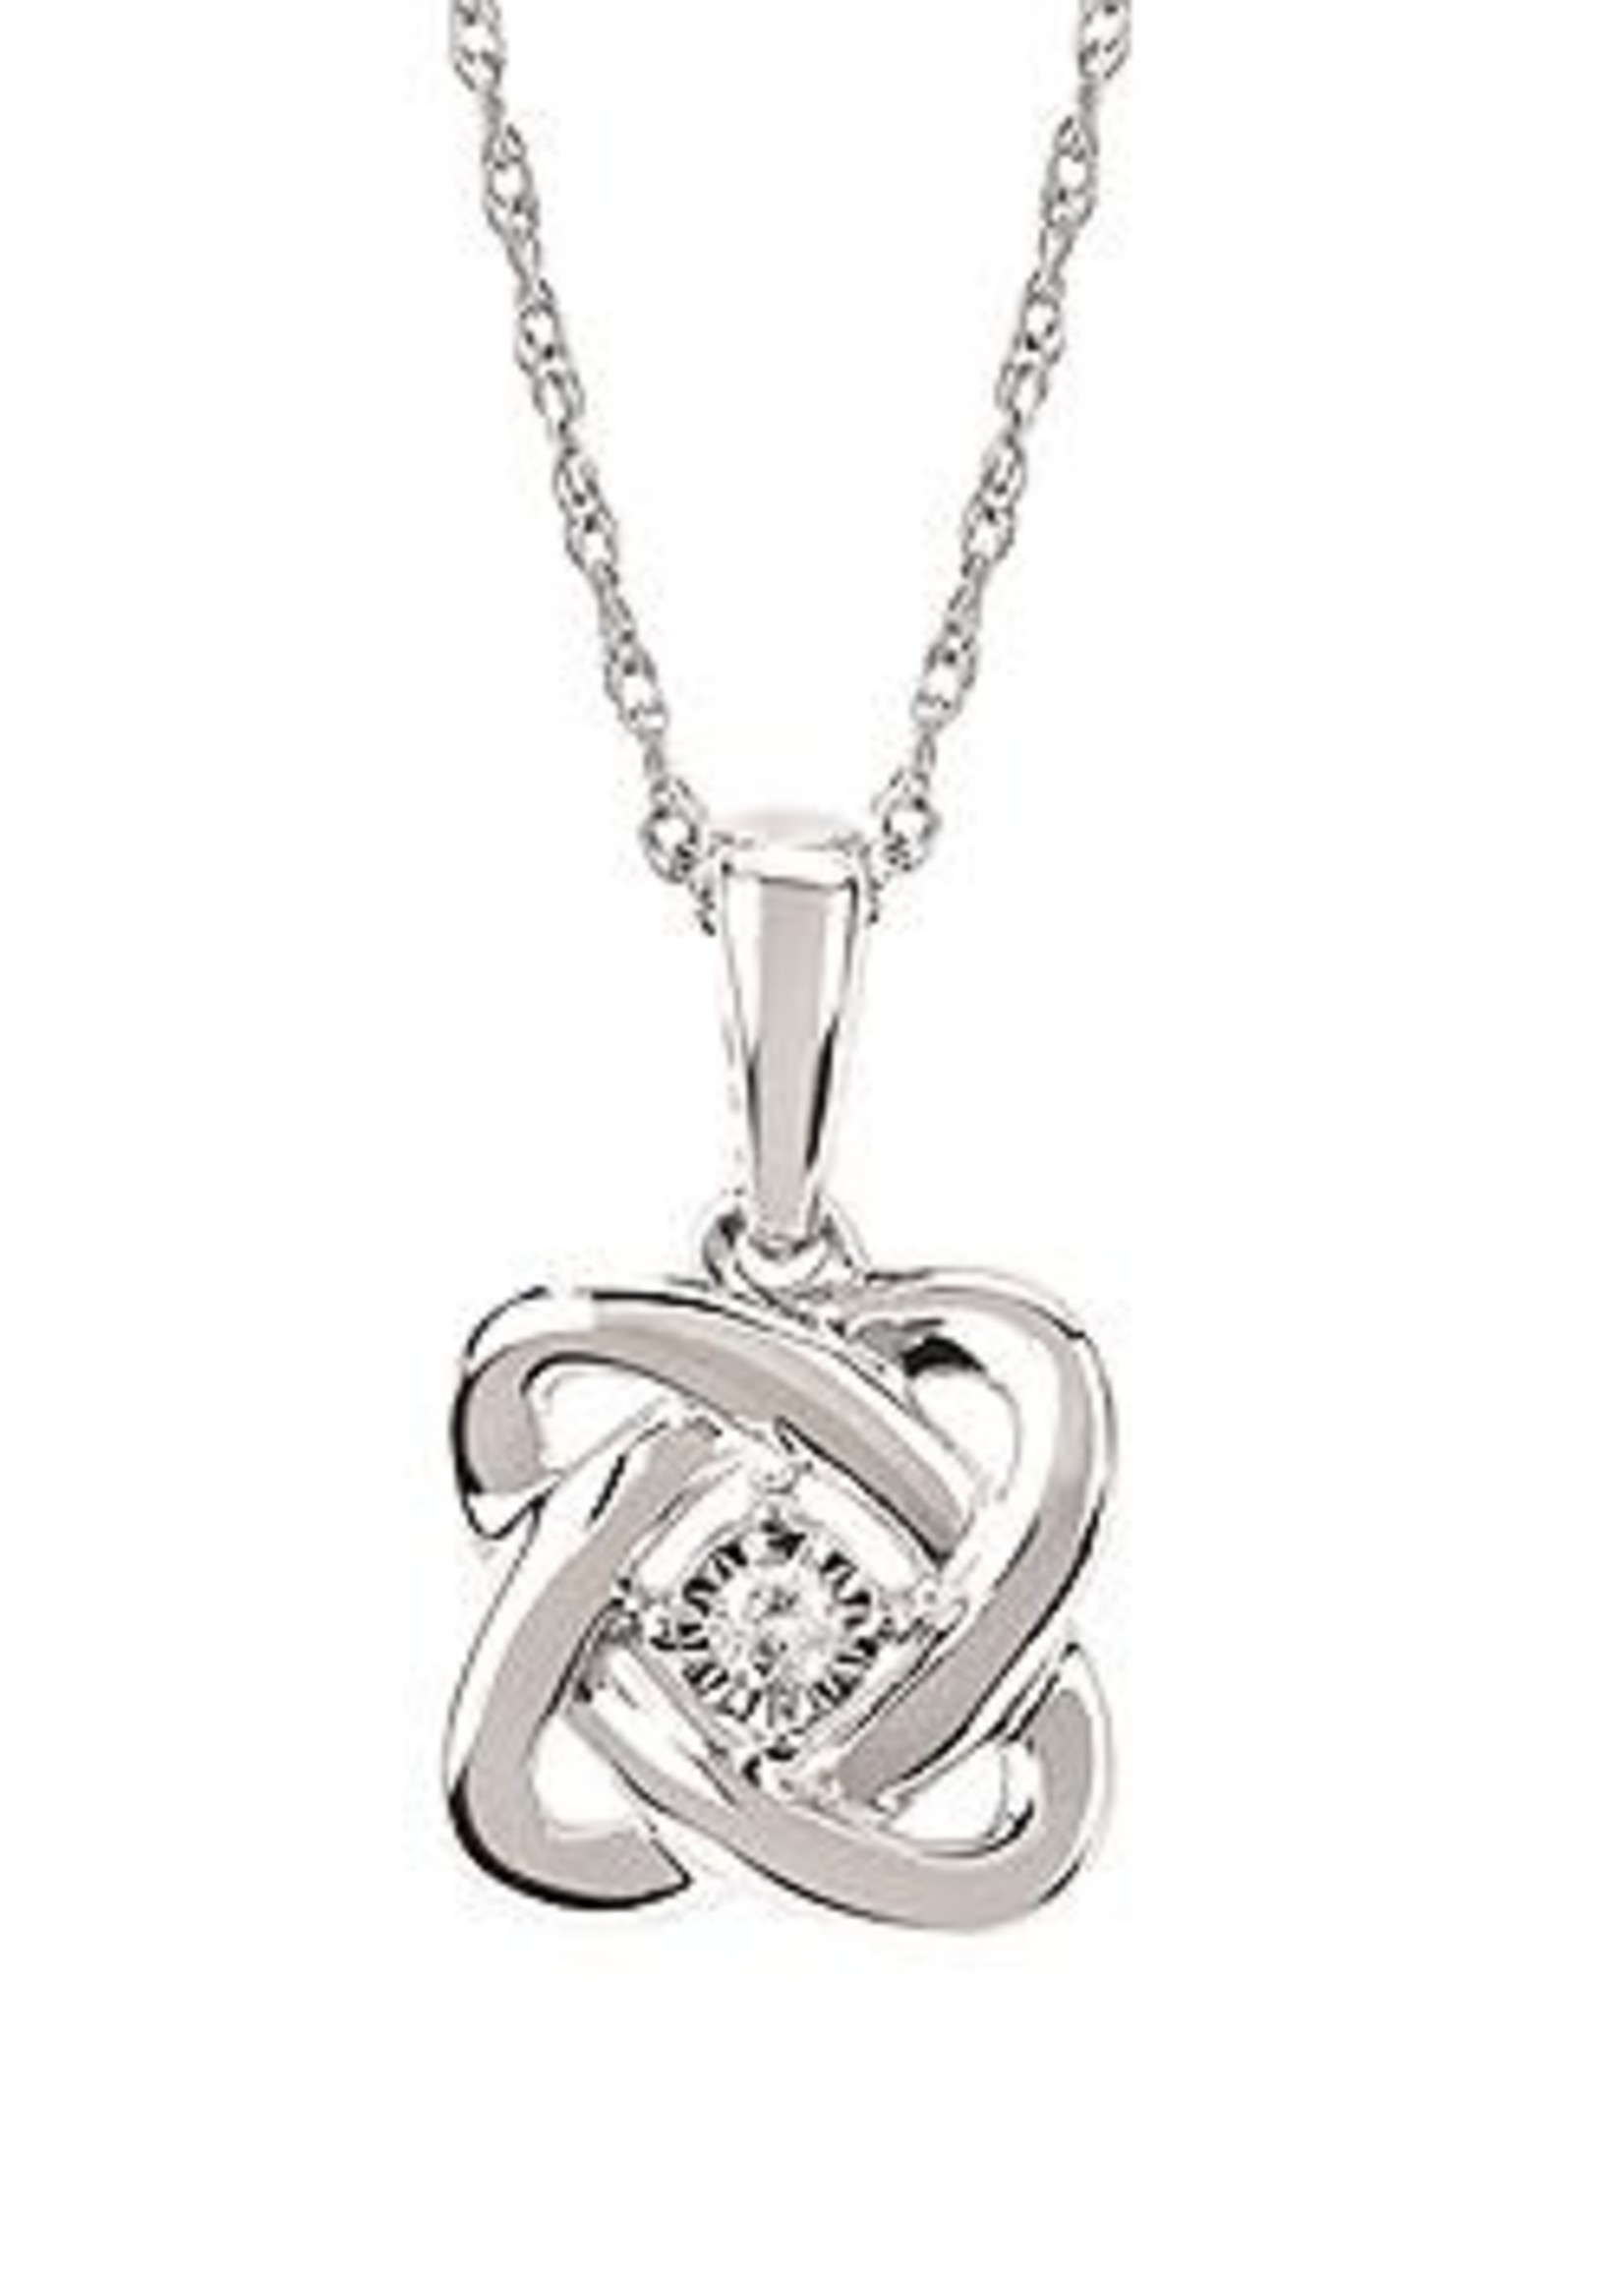 OSTBYE & ANDERSON Sterling Silver Diamond Pendant w/Chain 0.02CT.